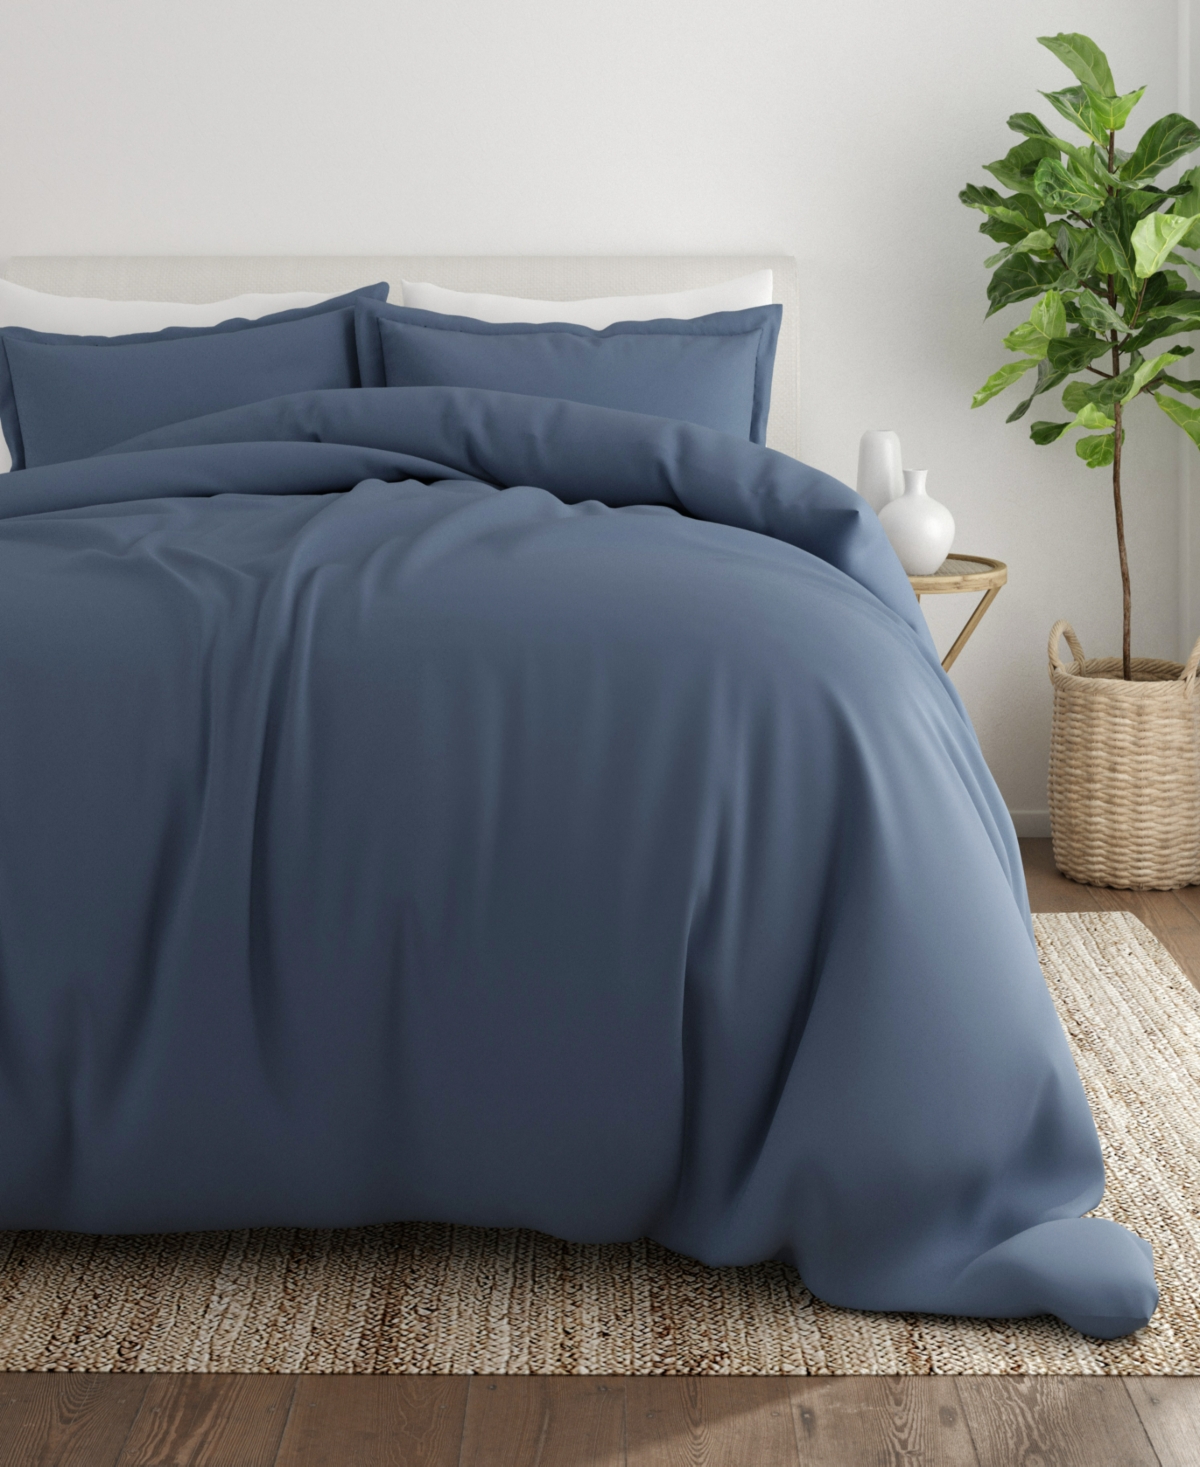 Ienjoy Home Dynamically Dashing Duvet Cover Set By The Home Collection, Full/queen In Stone